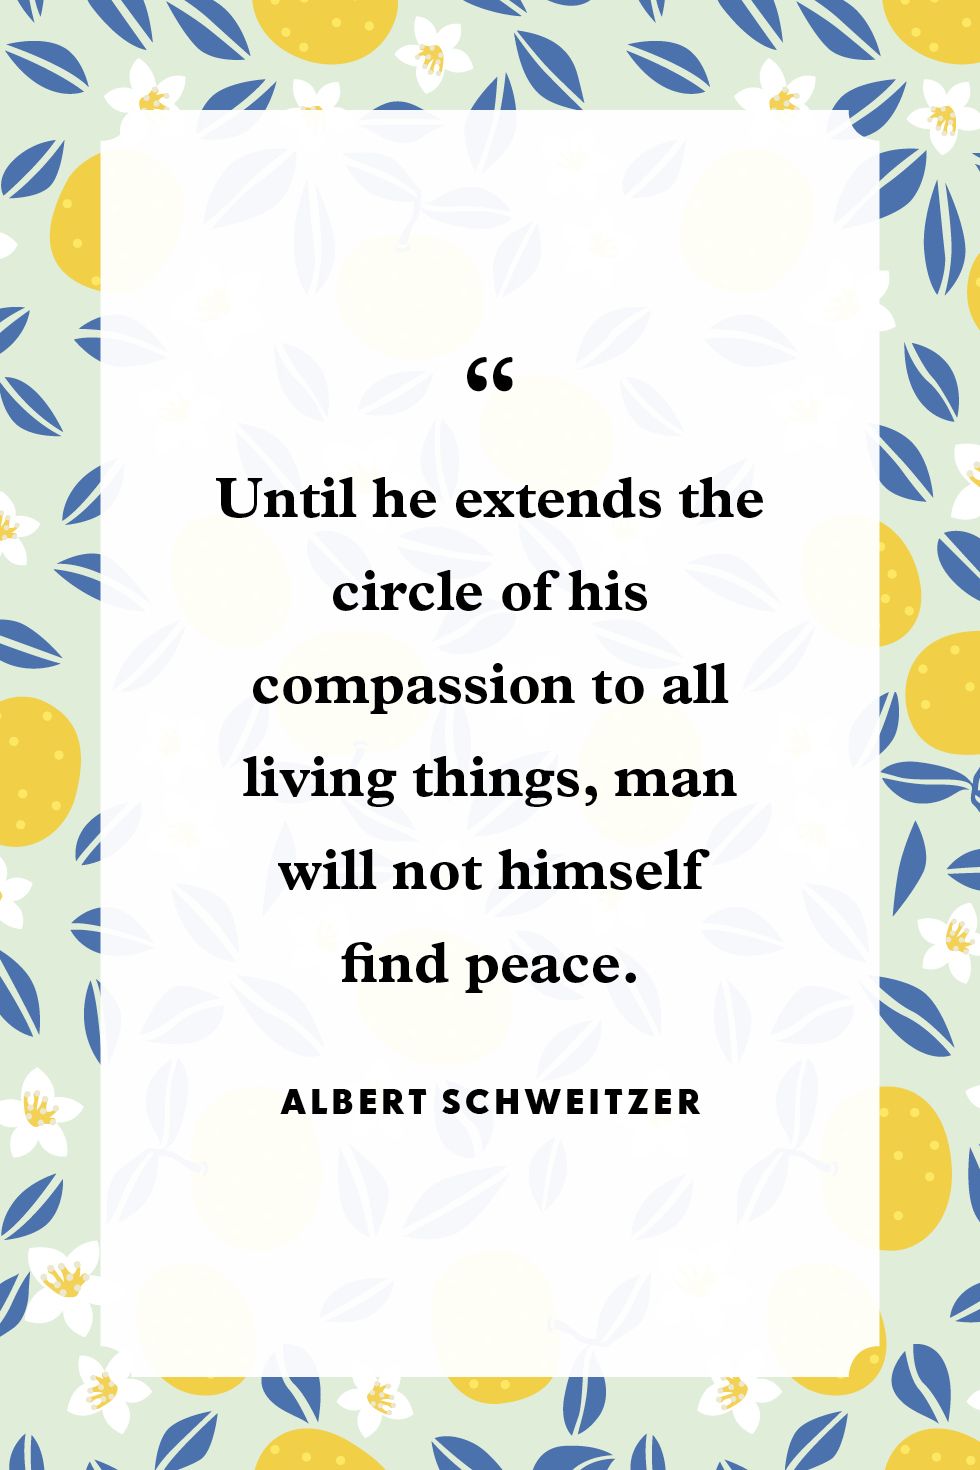 30 Best Peace Quotes Quotes And Sayings About Peace And Understanding